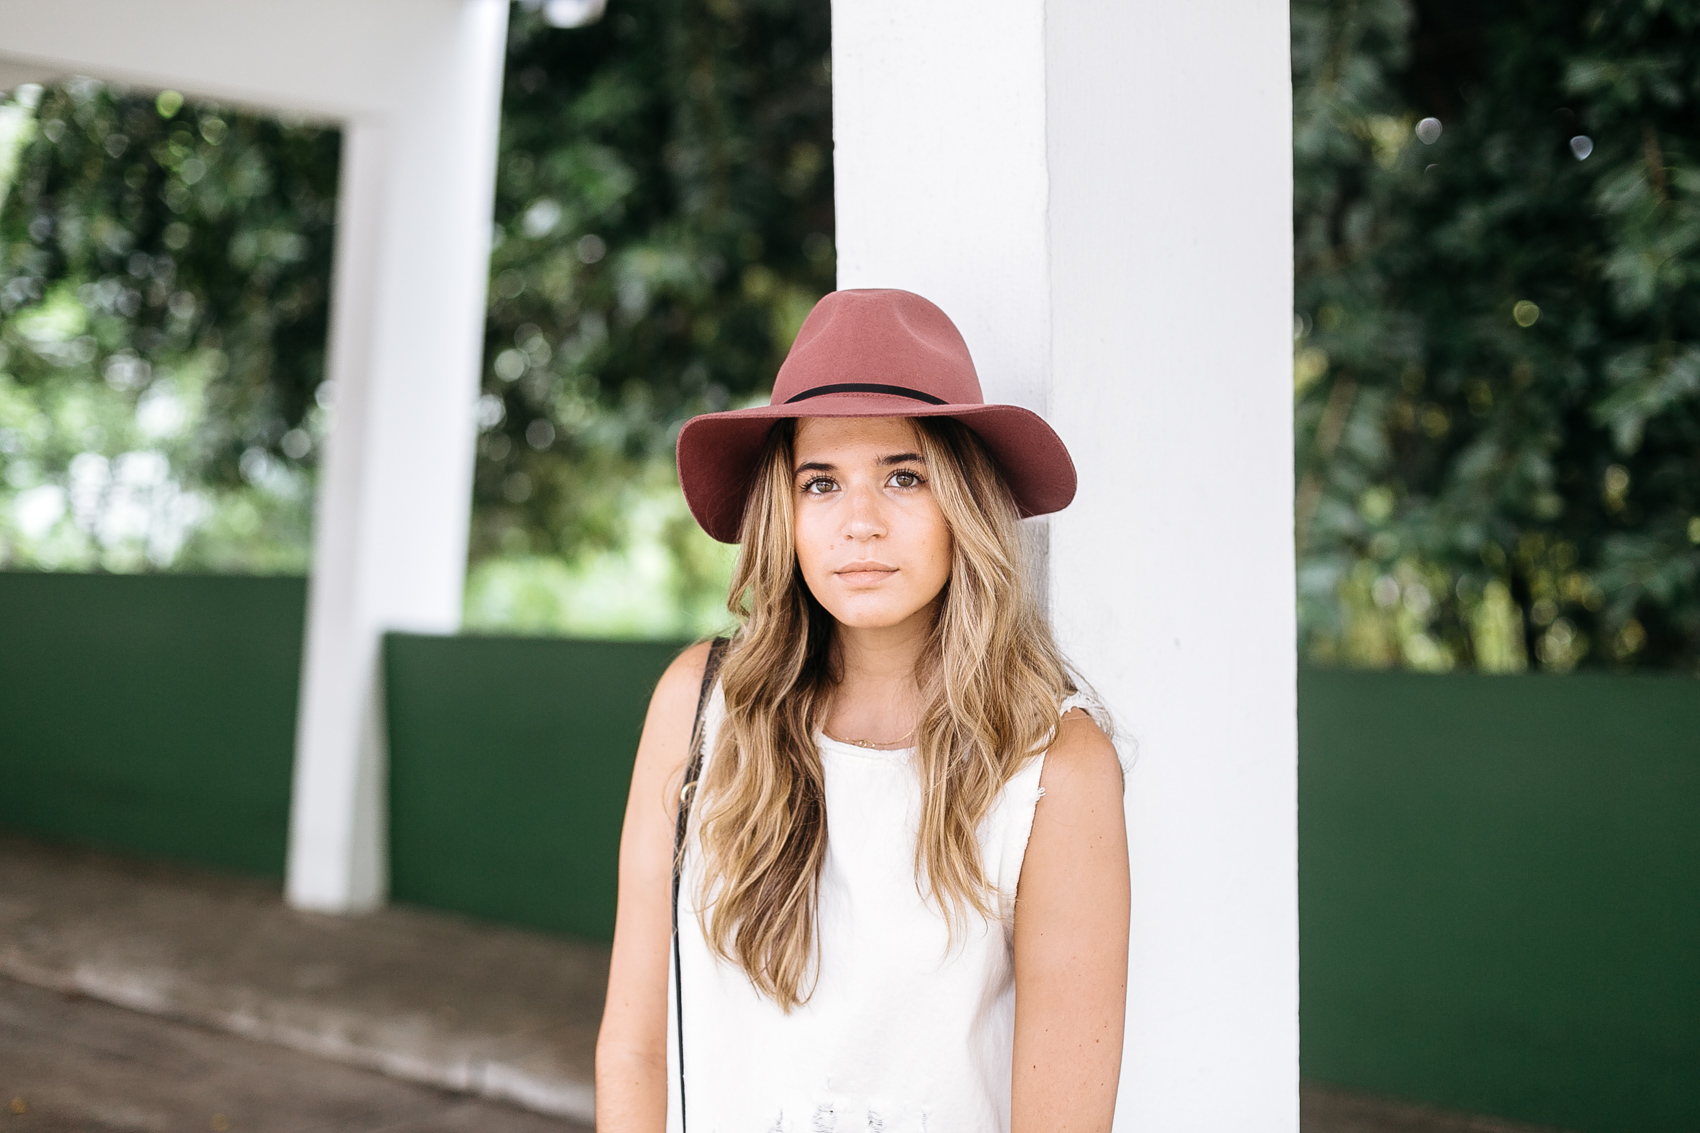 Maristella wearing a dusty rose wool fedora hat from Asos and boxy white denim top from Zara